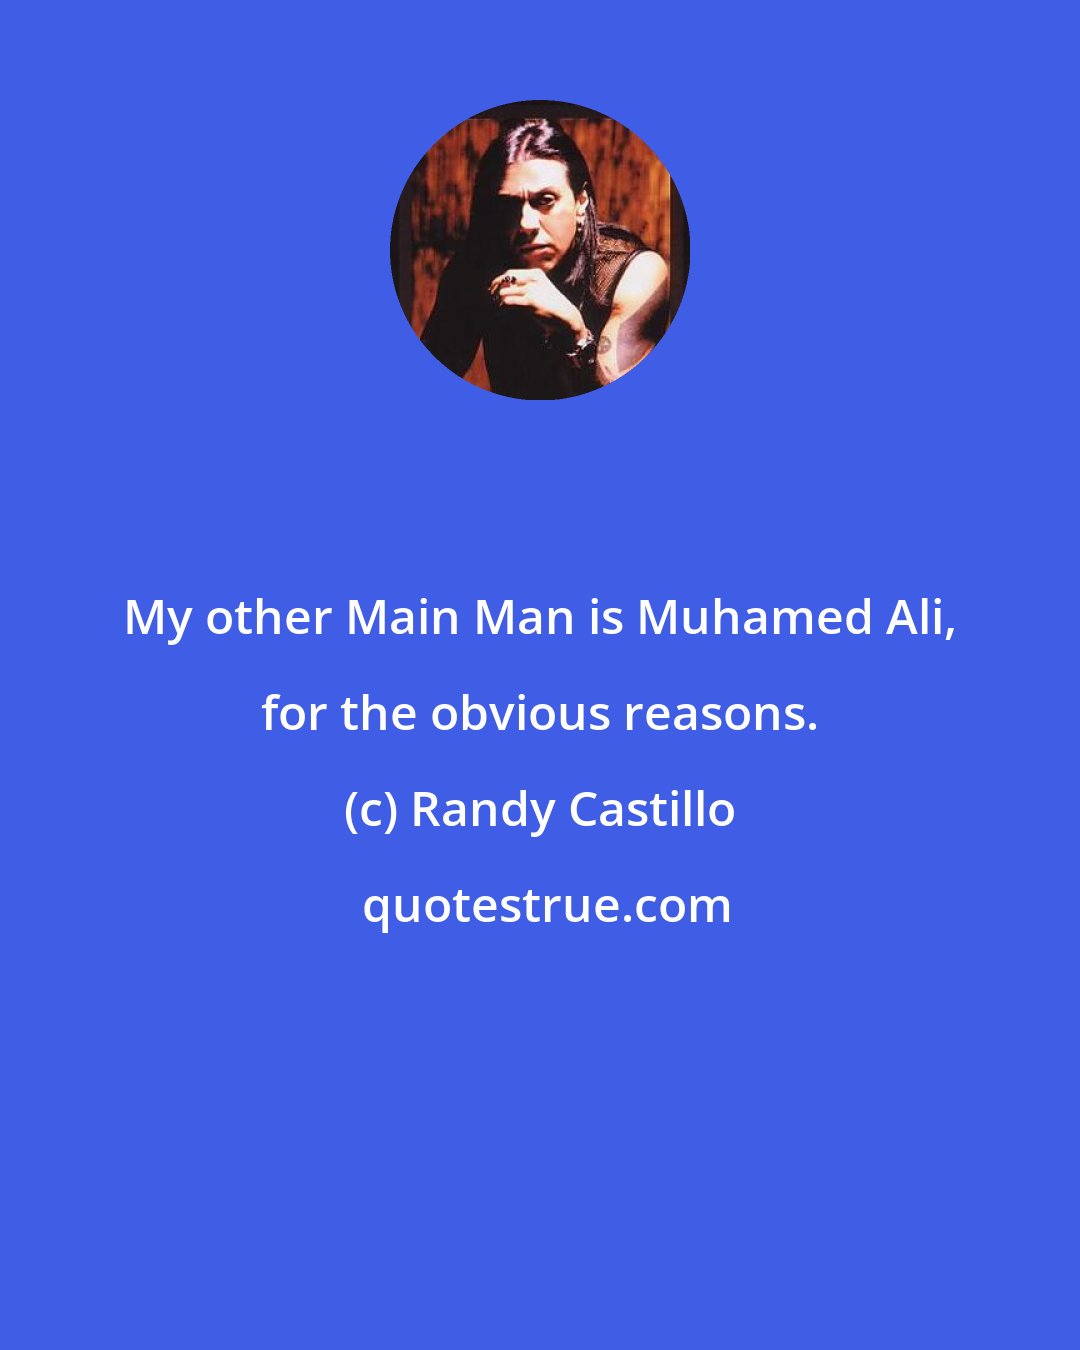 Randy Castillo: My other Main Man is Muhamed Ali, for the obvious reasons.